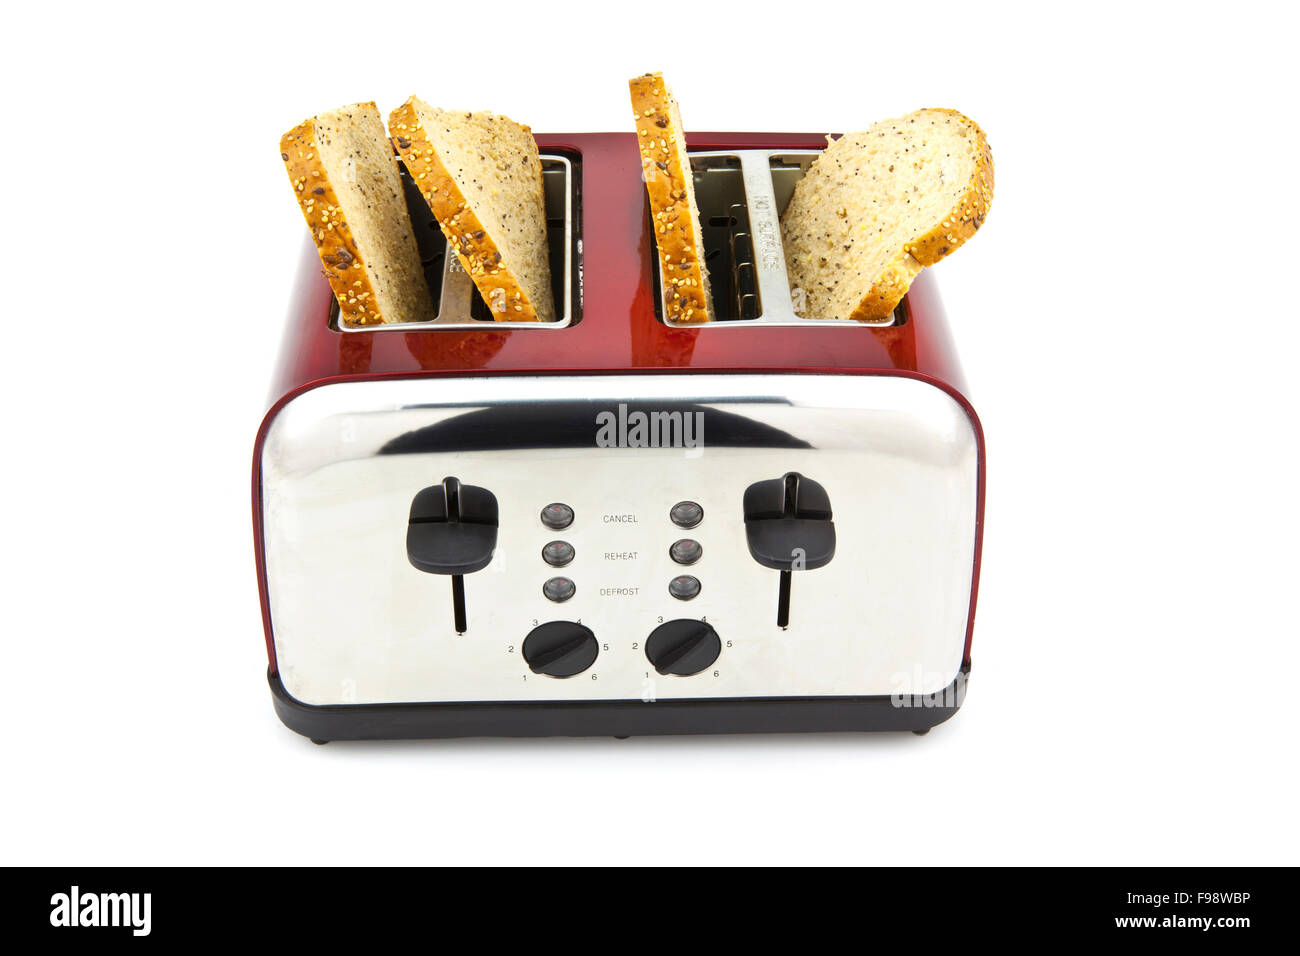 Modern toaster with bread slices on white background Stock Photo